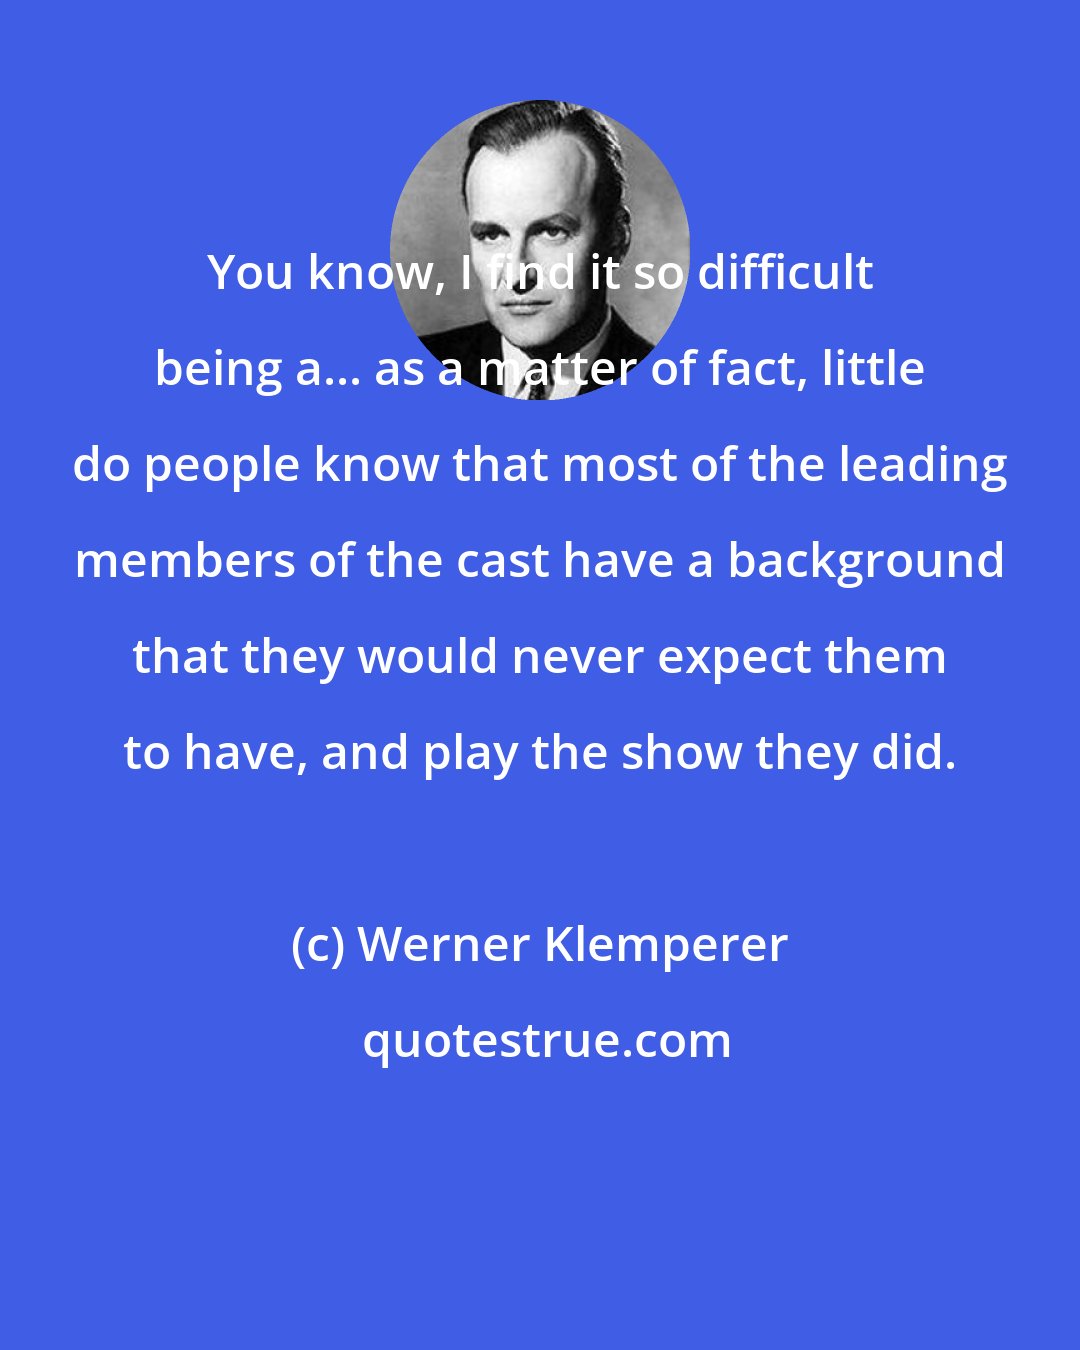 Werner Klemperer: You know, I find it so difficult being a... as a matter of fact, little do people know that most of the leading members of the cast have a background that they would never expect them to have, and play the show they did.